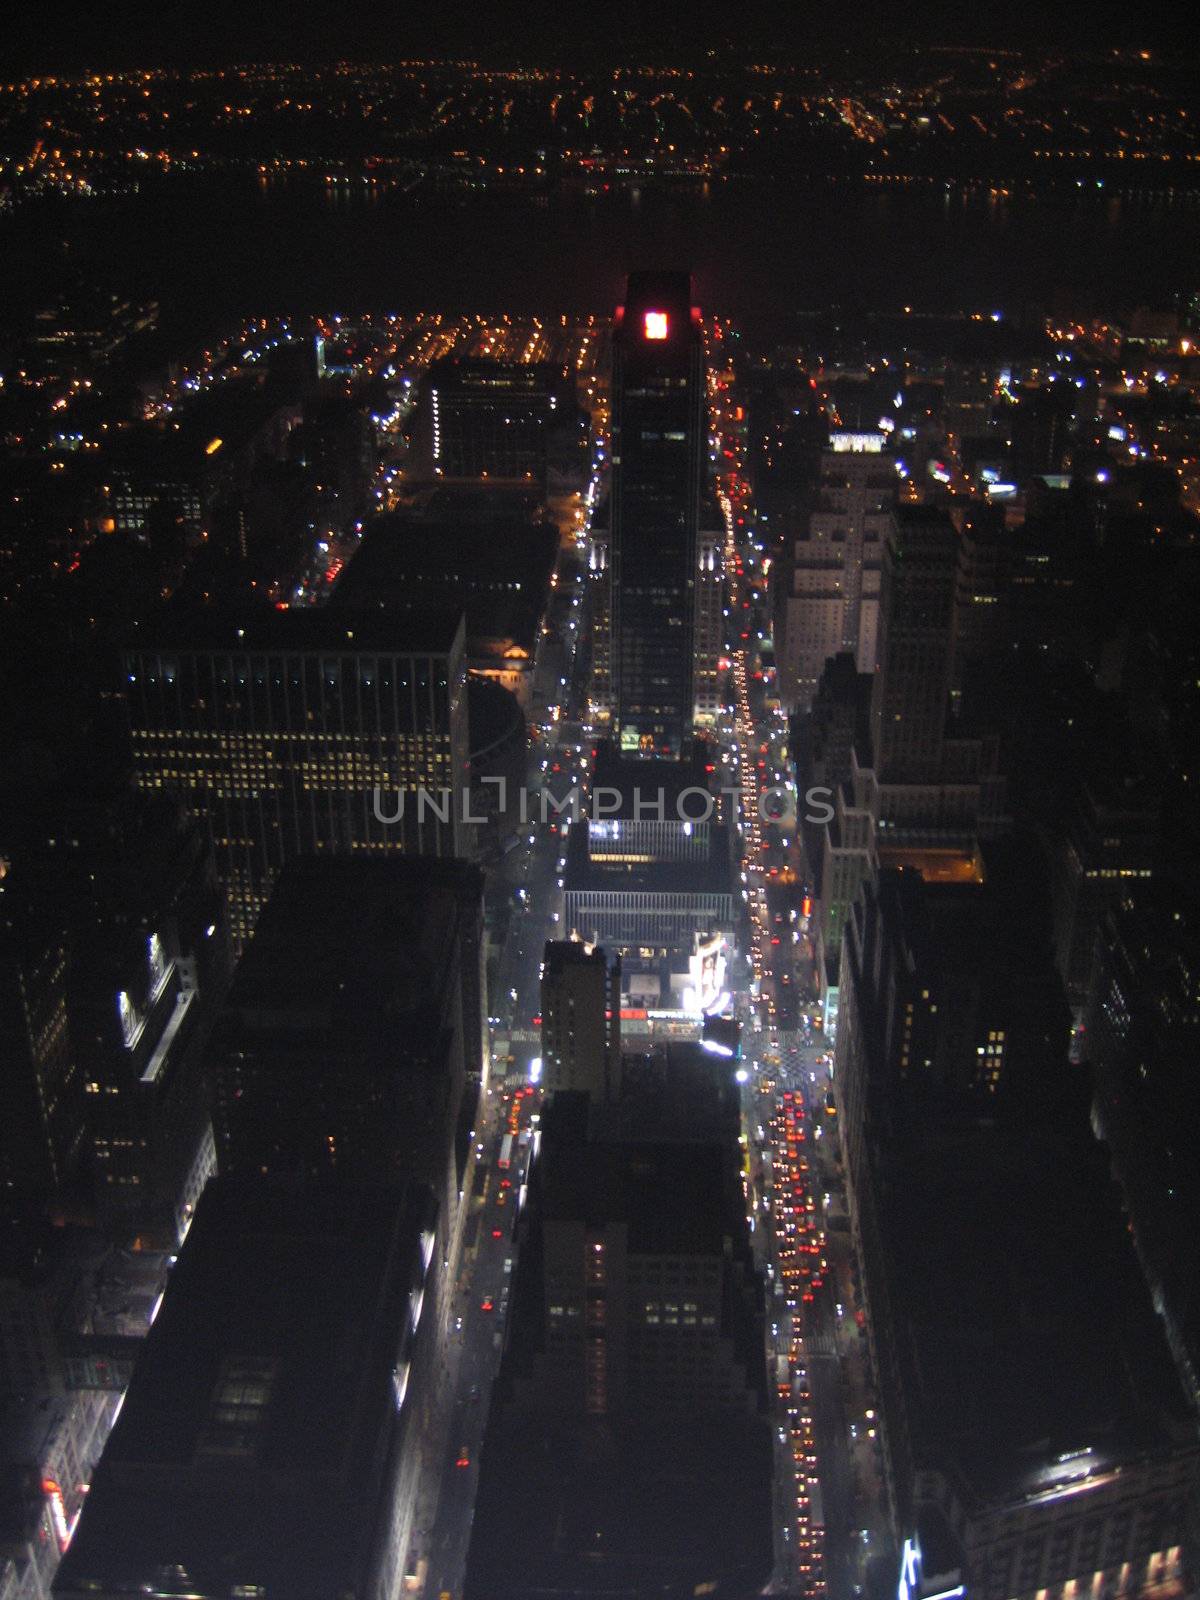 New York City as seen from the empire state building
